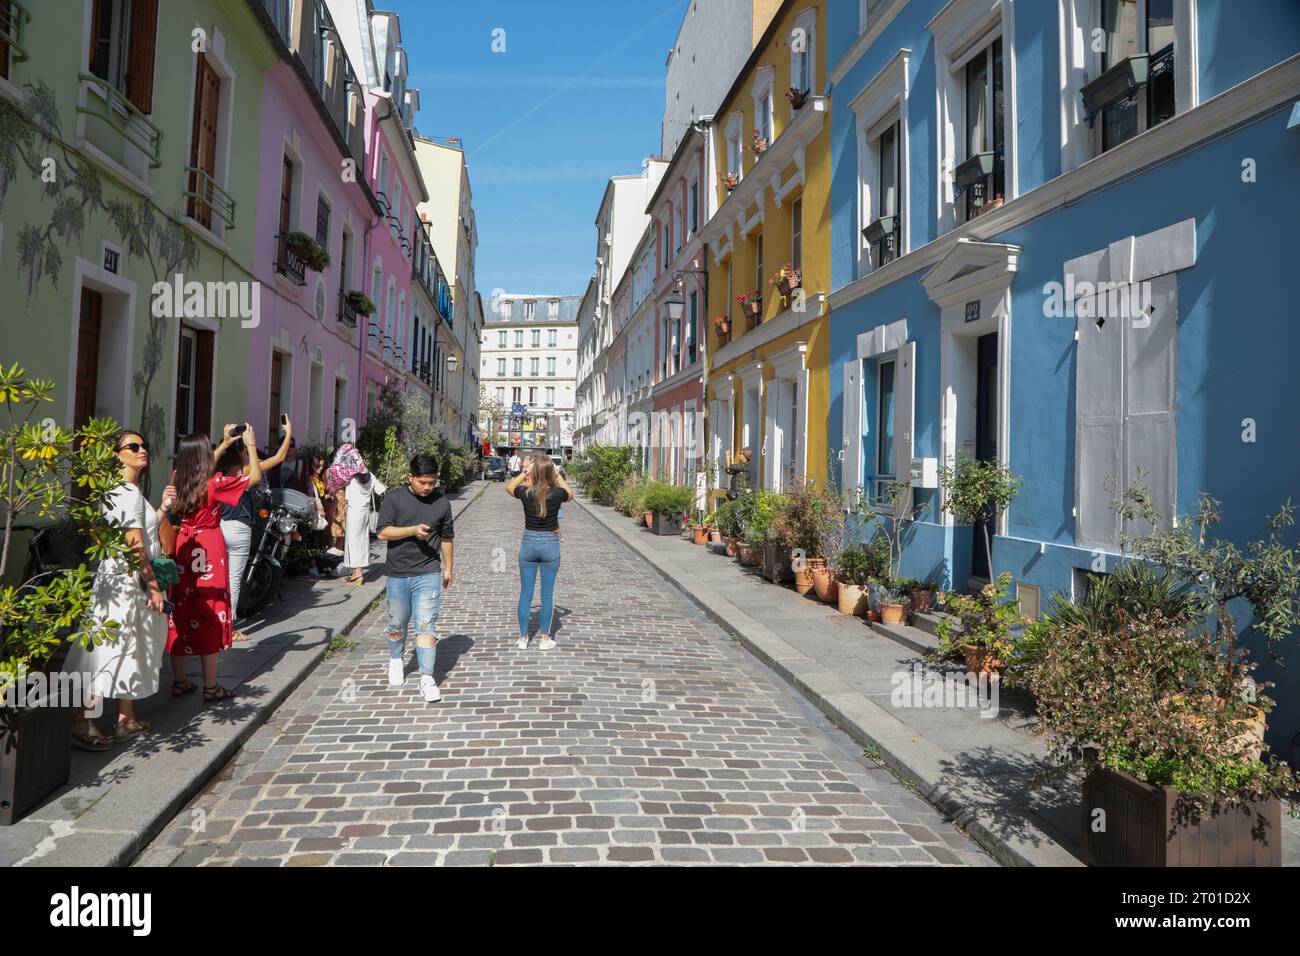 RUE CREMIEUX , A SOCIAL MEDIA OBSESSION IN PARIS Stock Photo